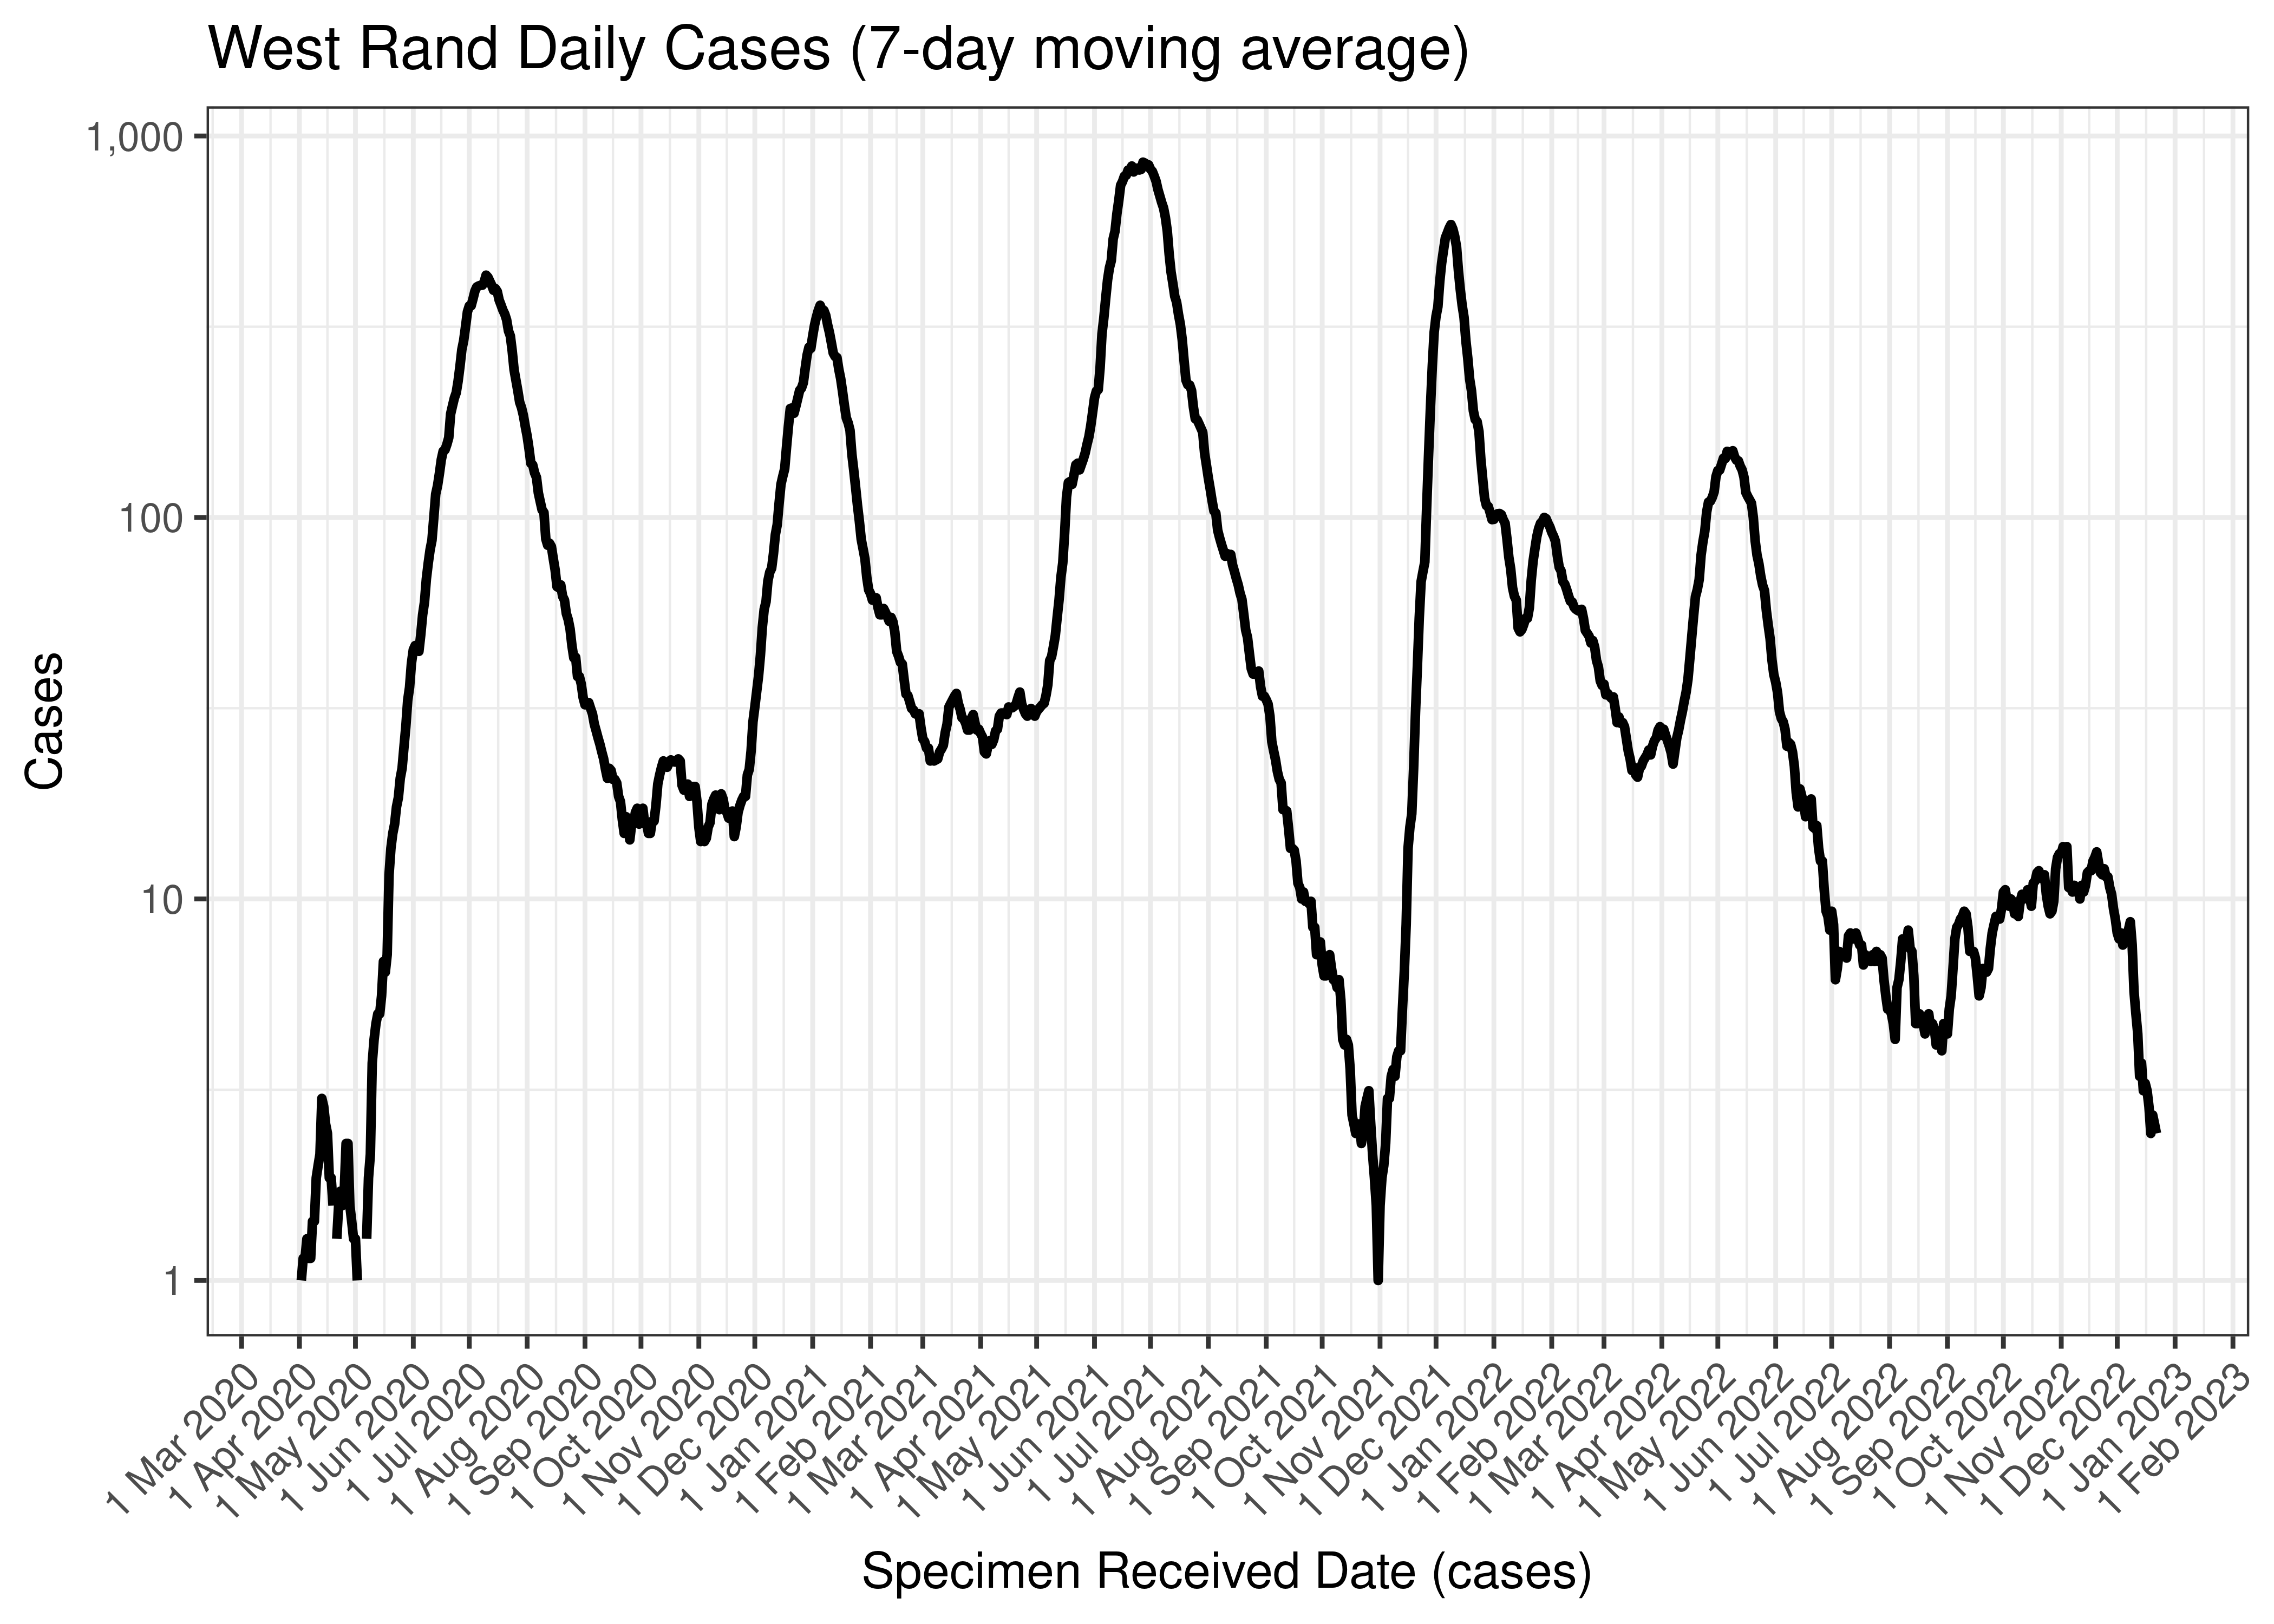 West Rand Daily Cases (7-day moving average)